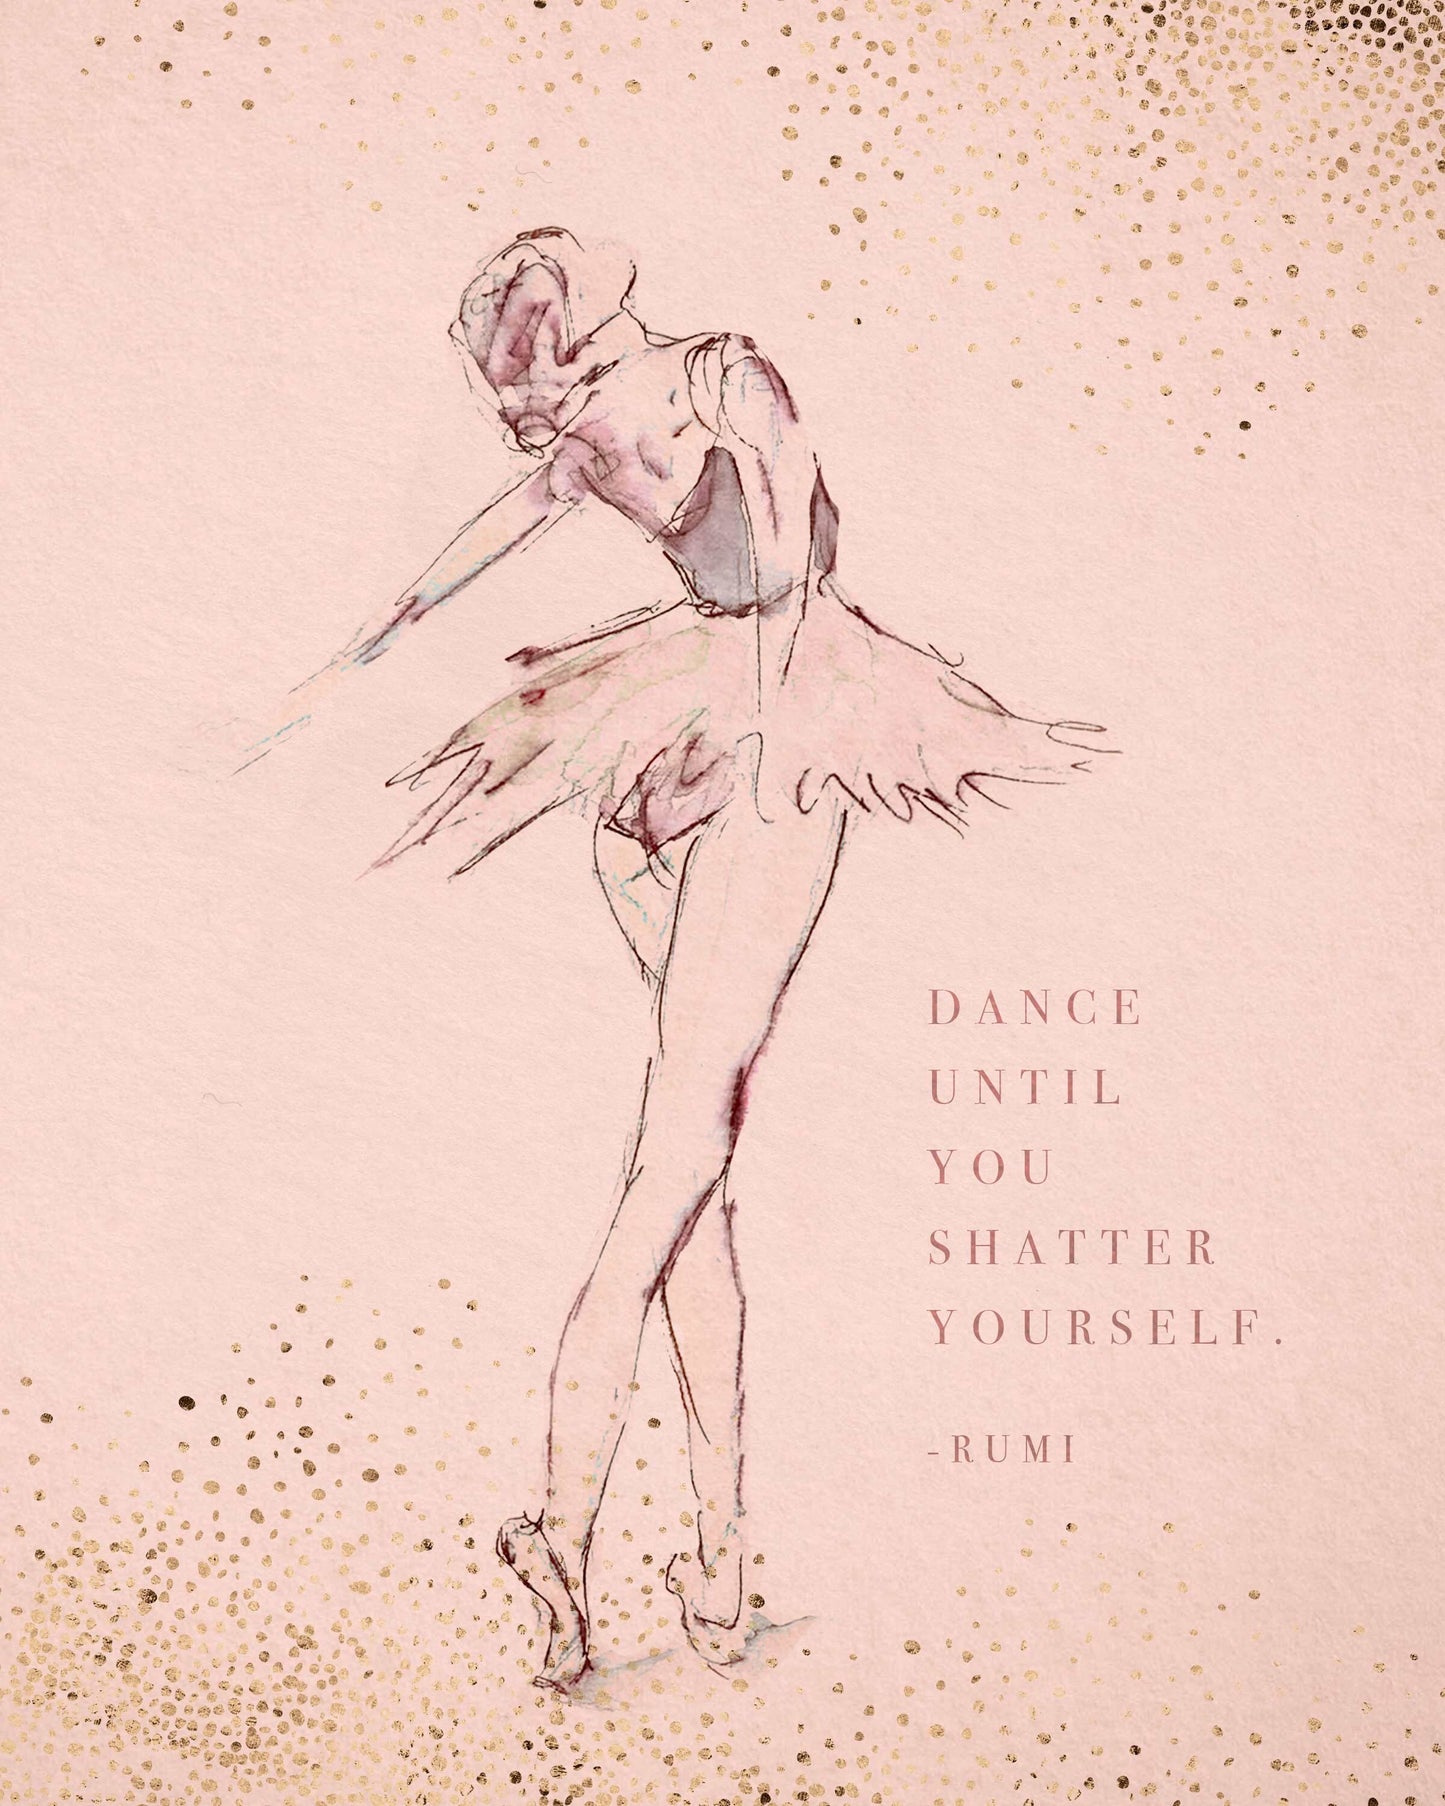 Ballet art featuring a quote by Rumi "Dance until you shatter yourself" Watercolor Ballerina Art, Gift for Dancer